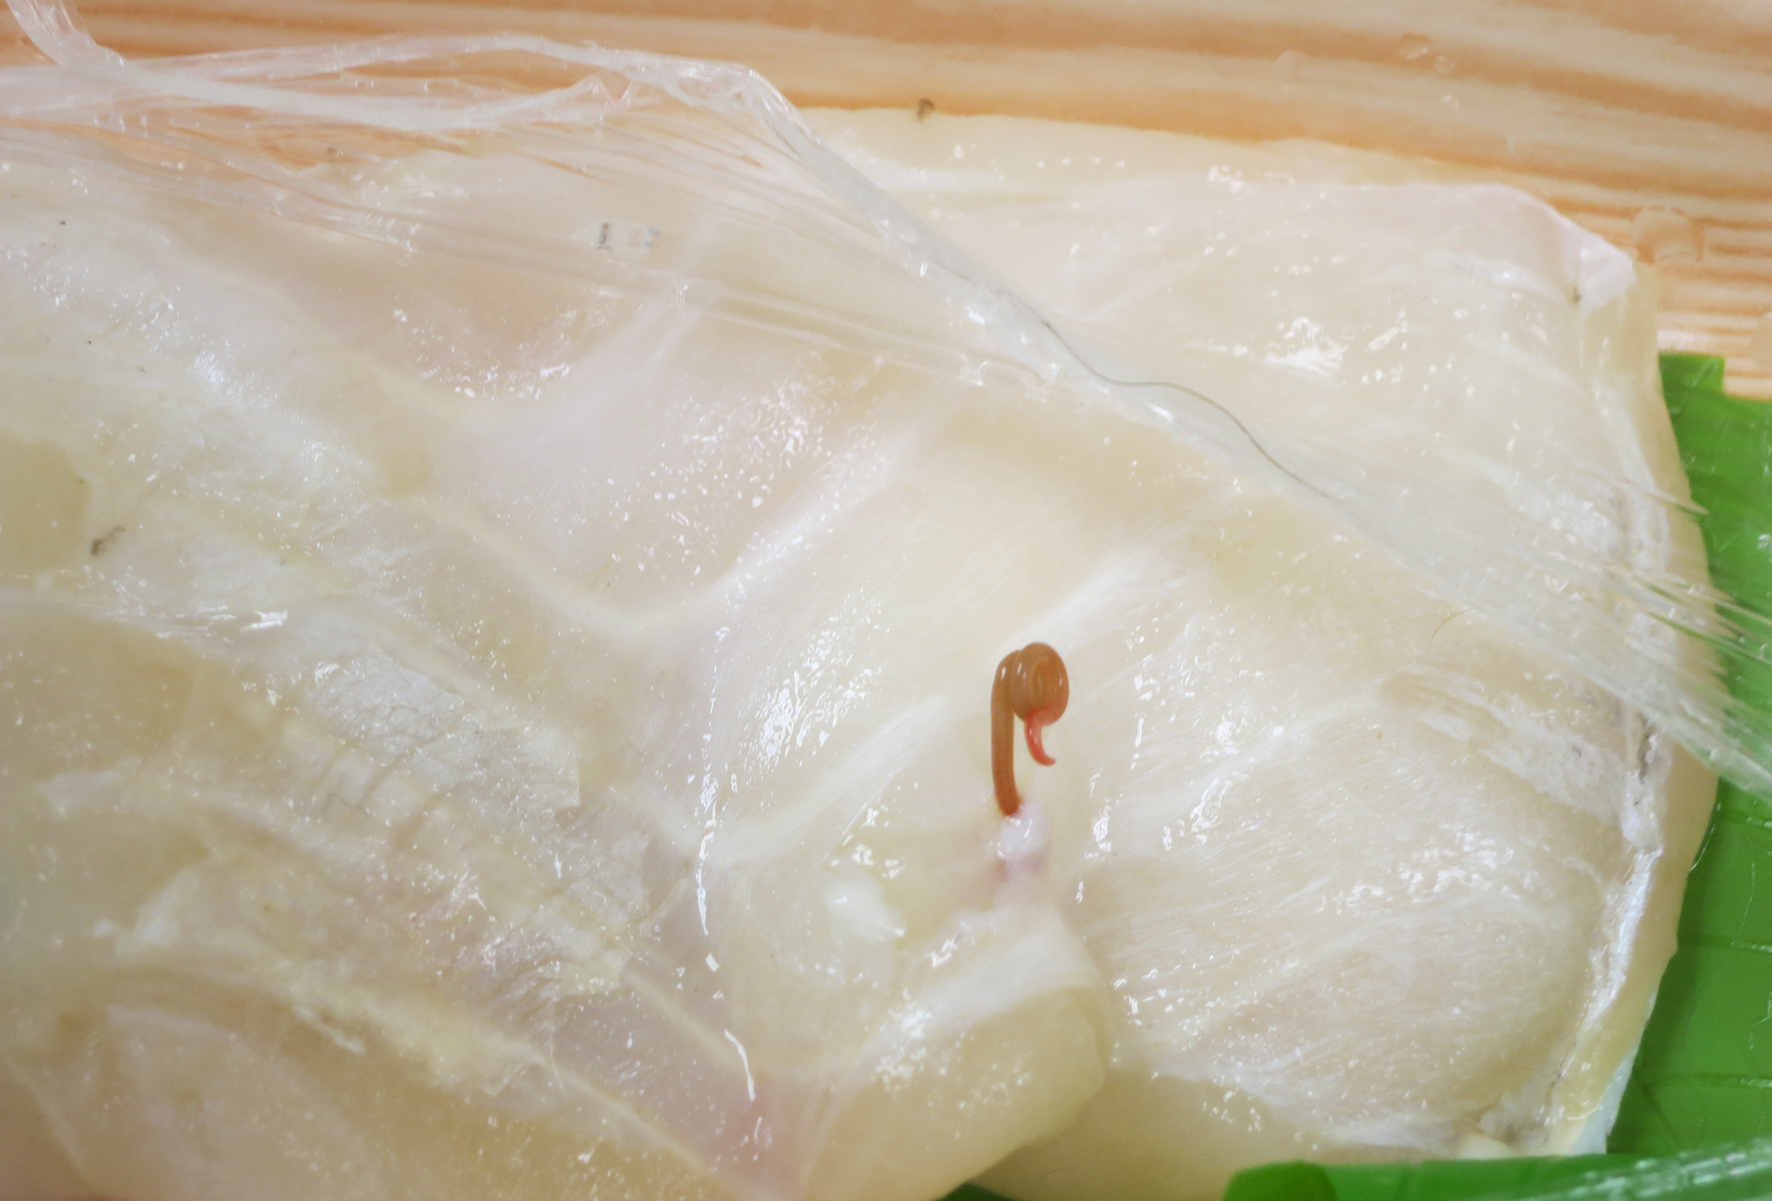 A photo taken from a food complaint case of a suspected parasite found in raw fish.